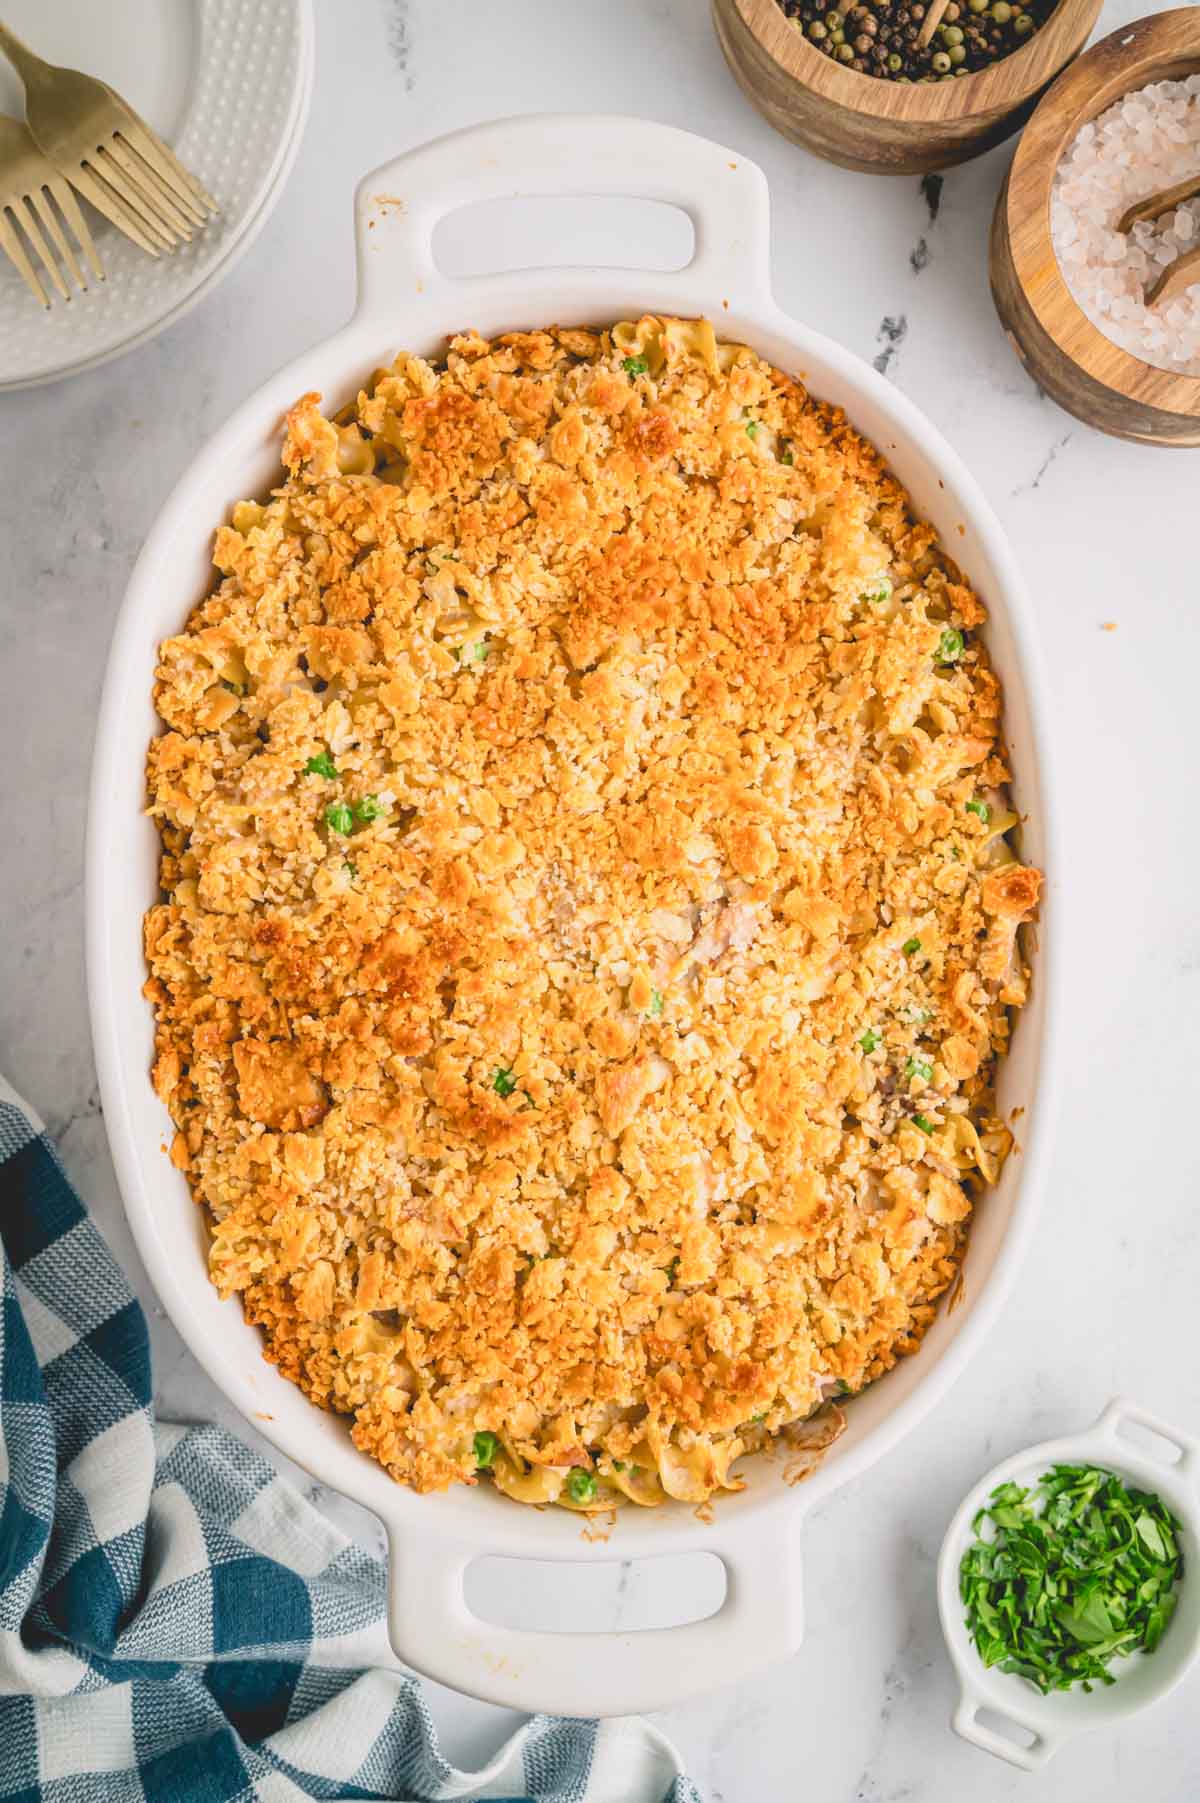 Overhead image of a baked tuna casserole topped with a cracker topping.